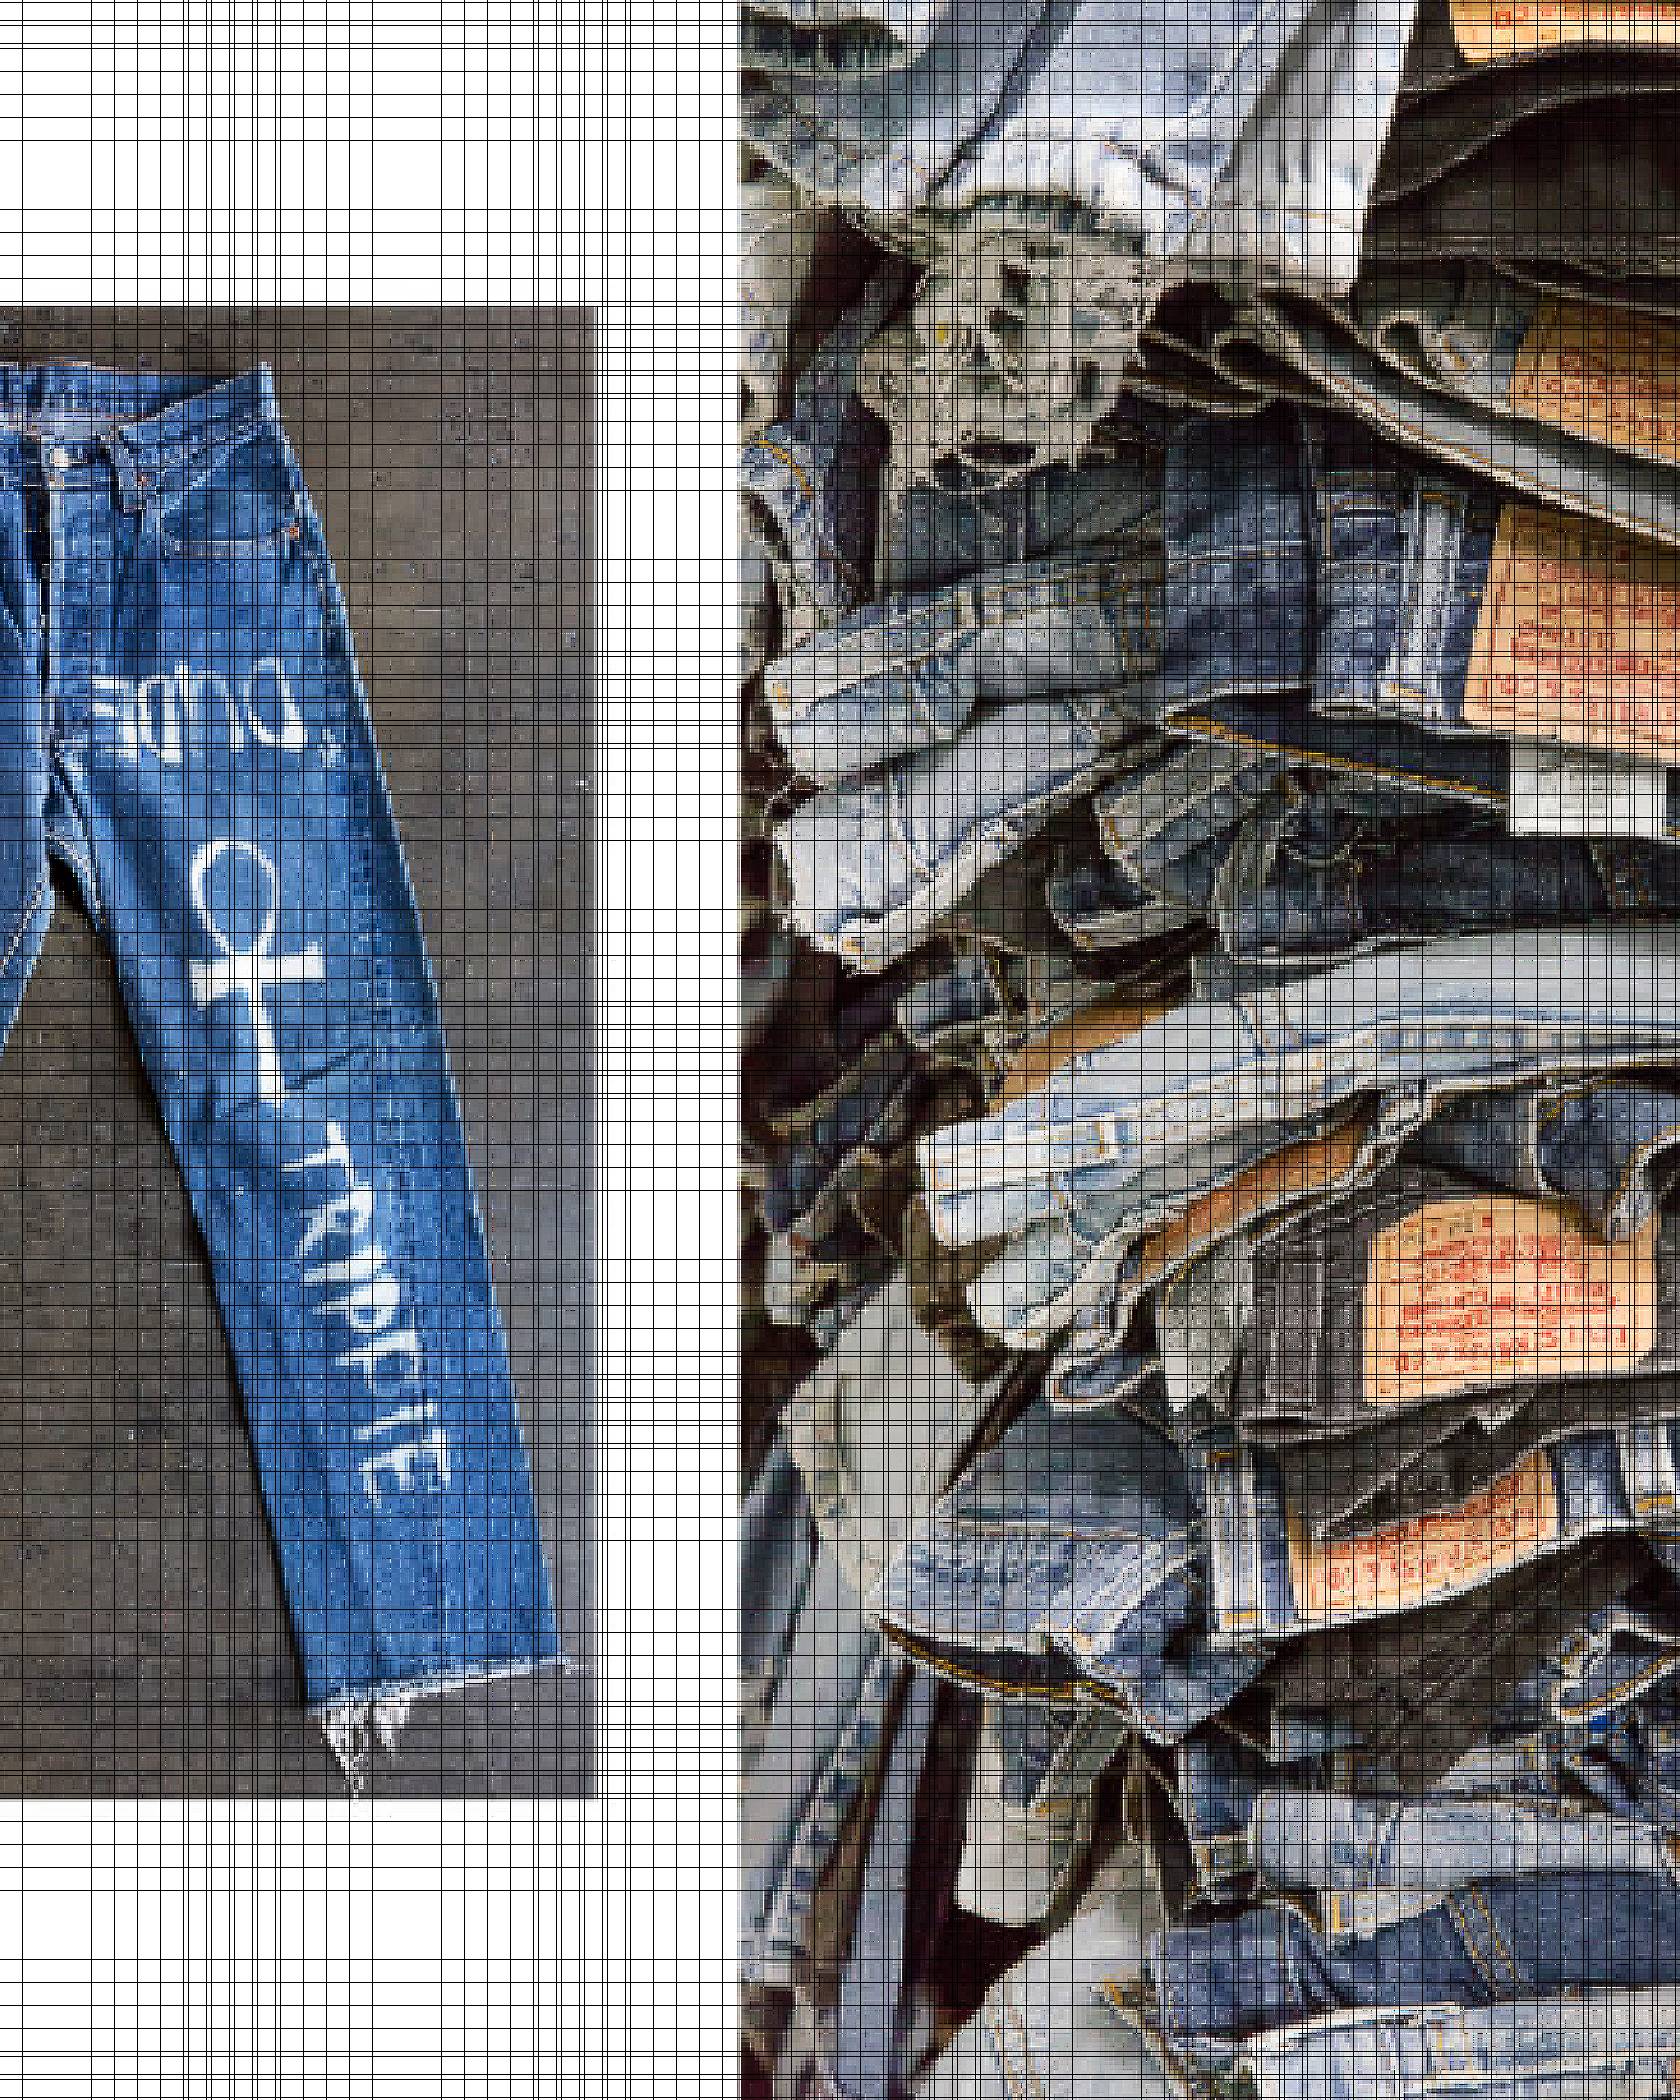 Jeans laying flat on the floor and having white spray paint with words on them.